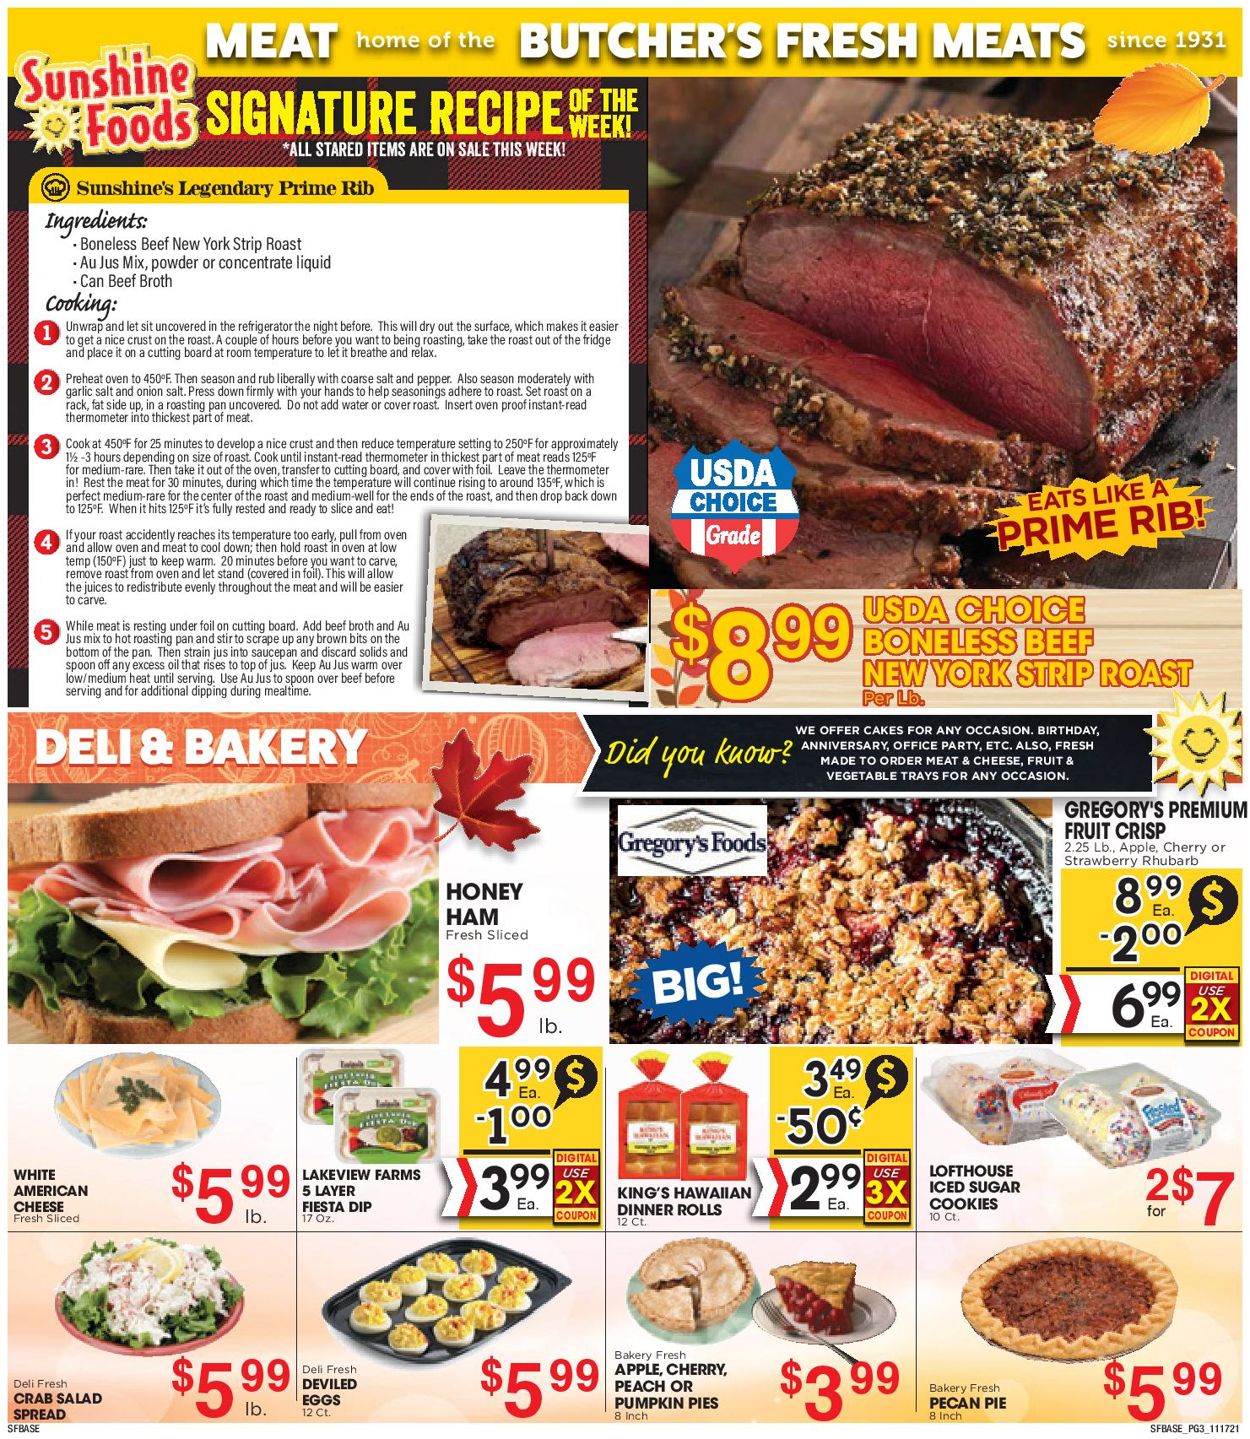 Catalogue Sunshine Foods THANKSGIVING 2021 from 11/17/2021